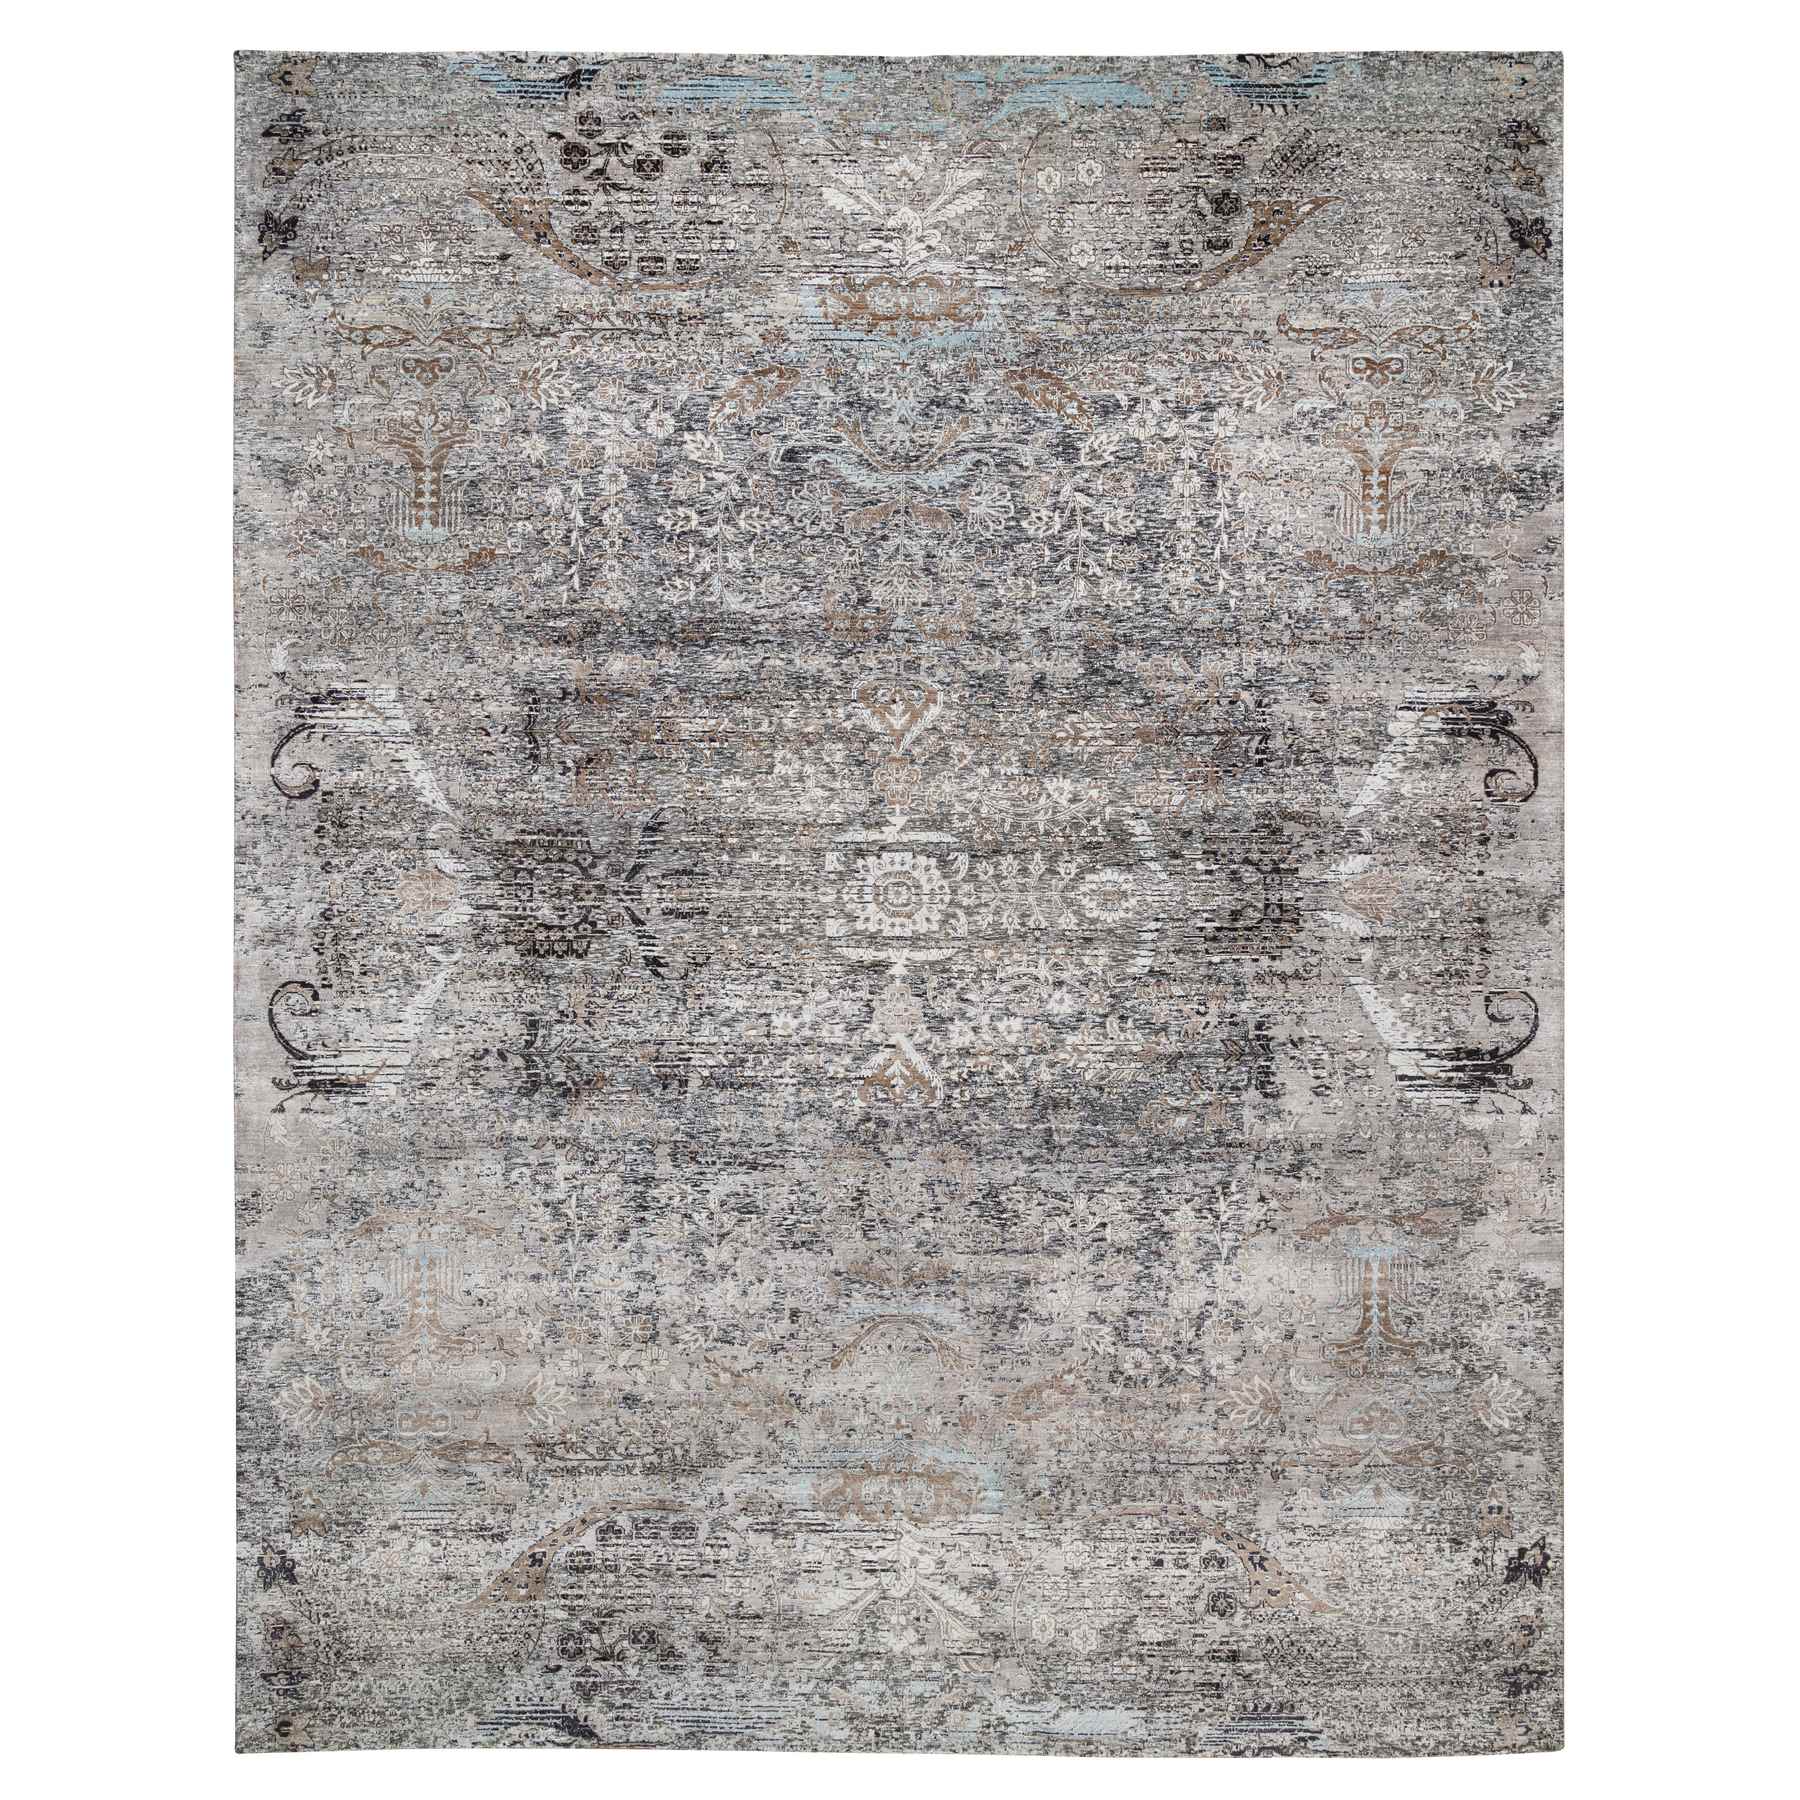 11'10"x15' Gray, Modern Transitional Persian Influence Erased Medallion Design, Silk with Textured Wool Hand Woven, Oversized Oriental Rug 